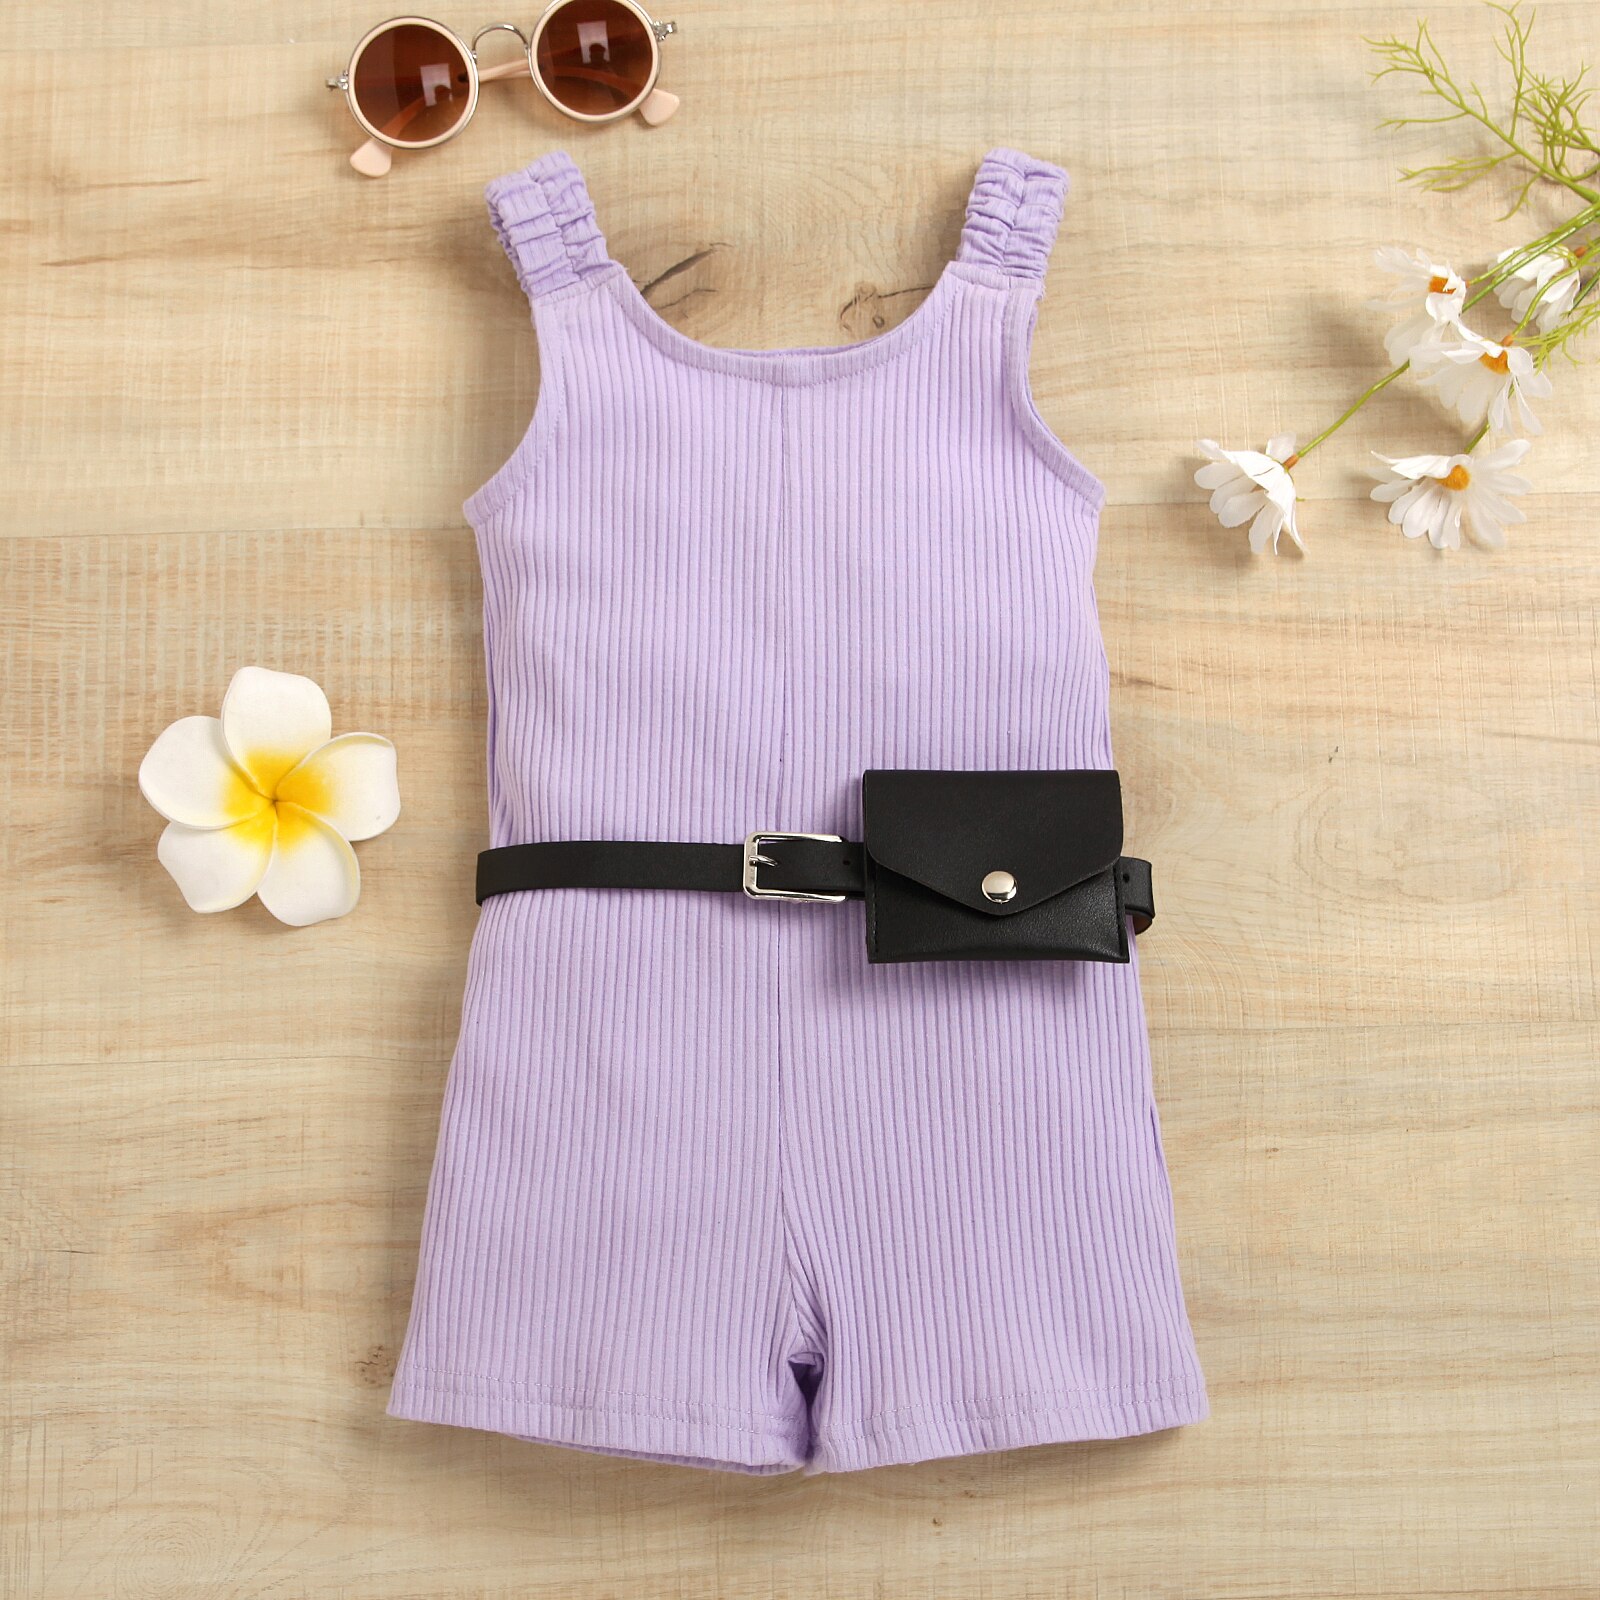 Infant-Kids-Baby-Girl-s-Jumpsuit-Set-Wide-Strap-Sleeveless-Ribbed-Short-Playsuit-Ribbed-Jumpsuit-Waist-1